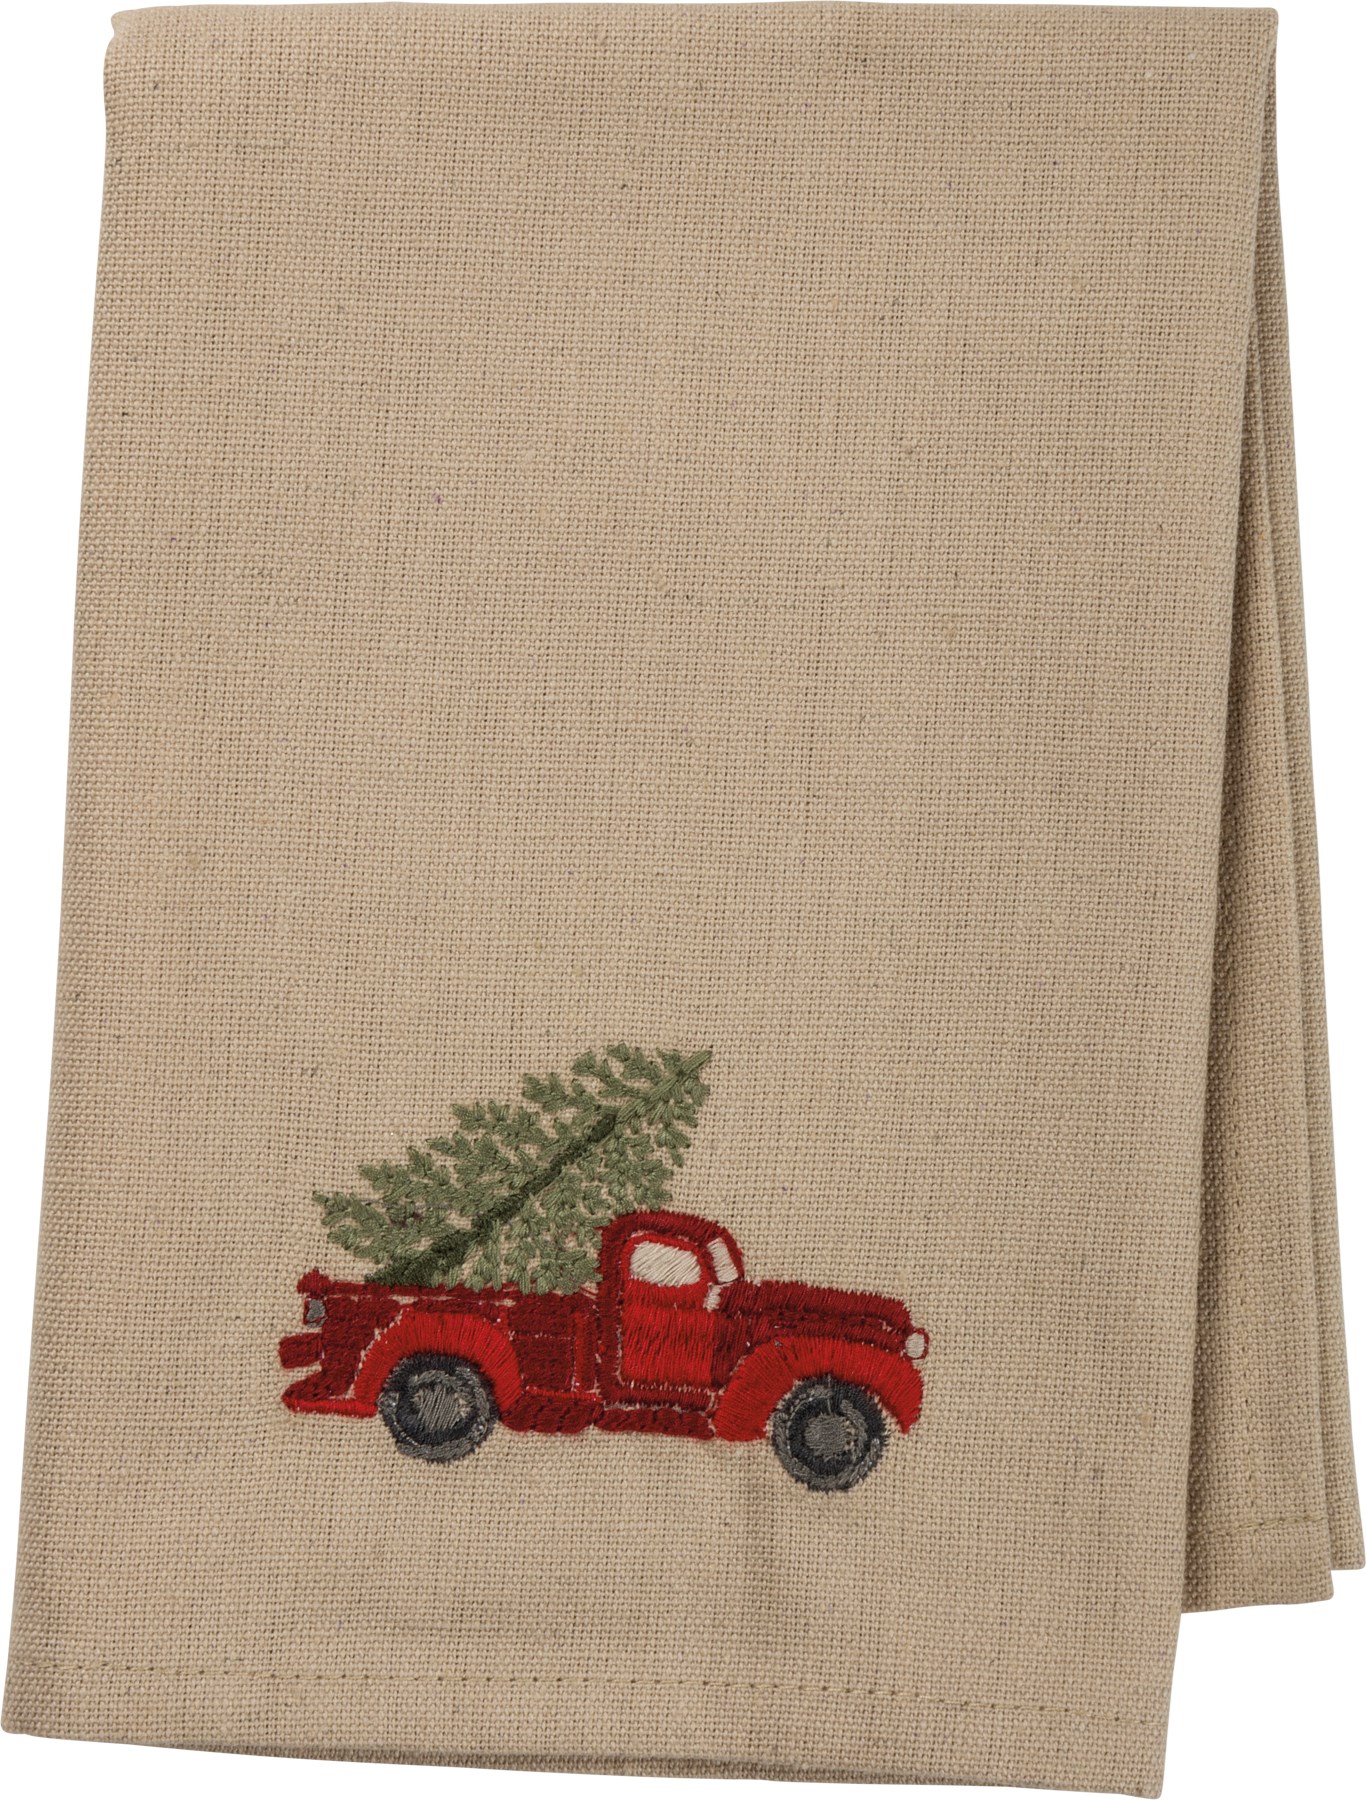 Truck with Christmas Tree Primitives by Kathy Stitch Art Dinner Napkins Set